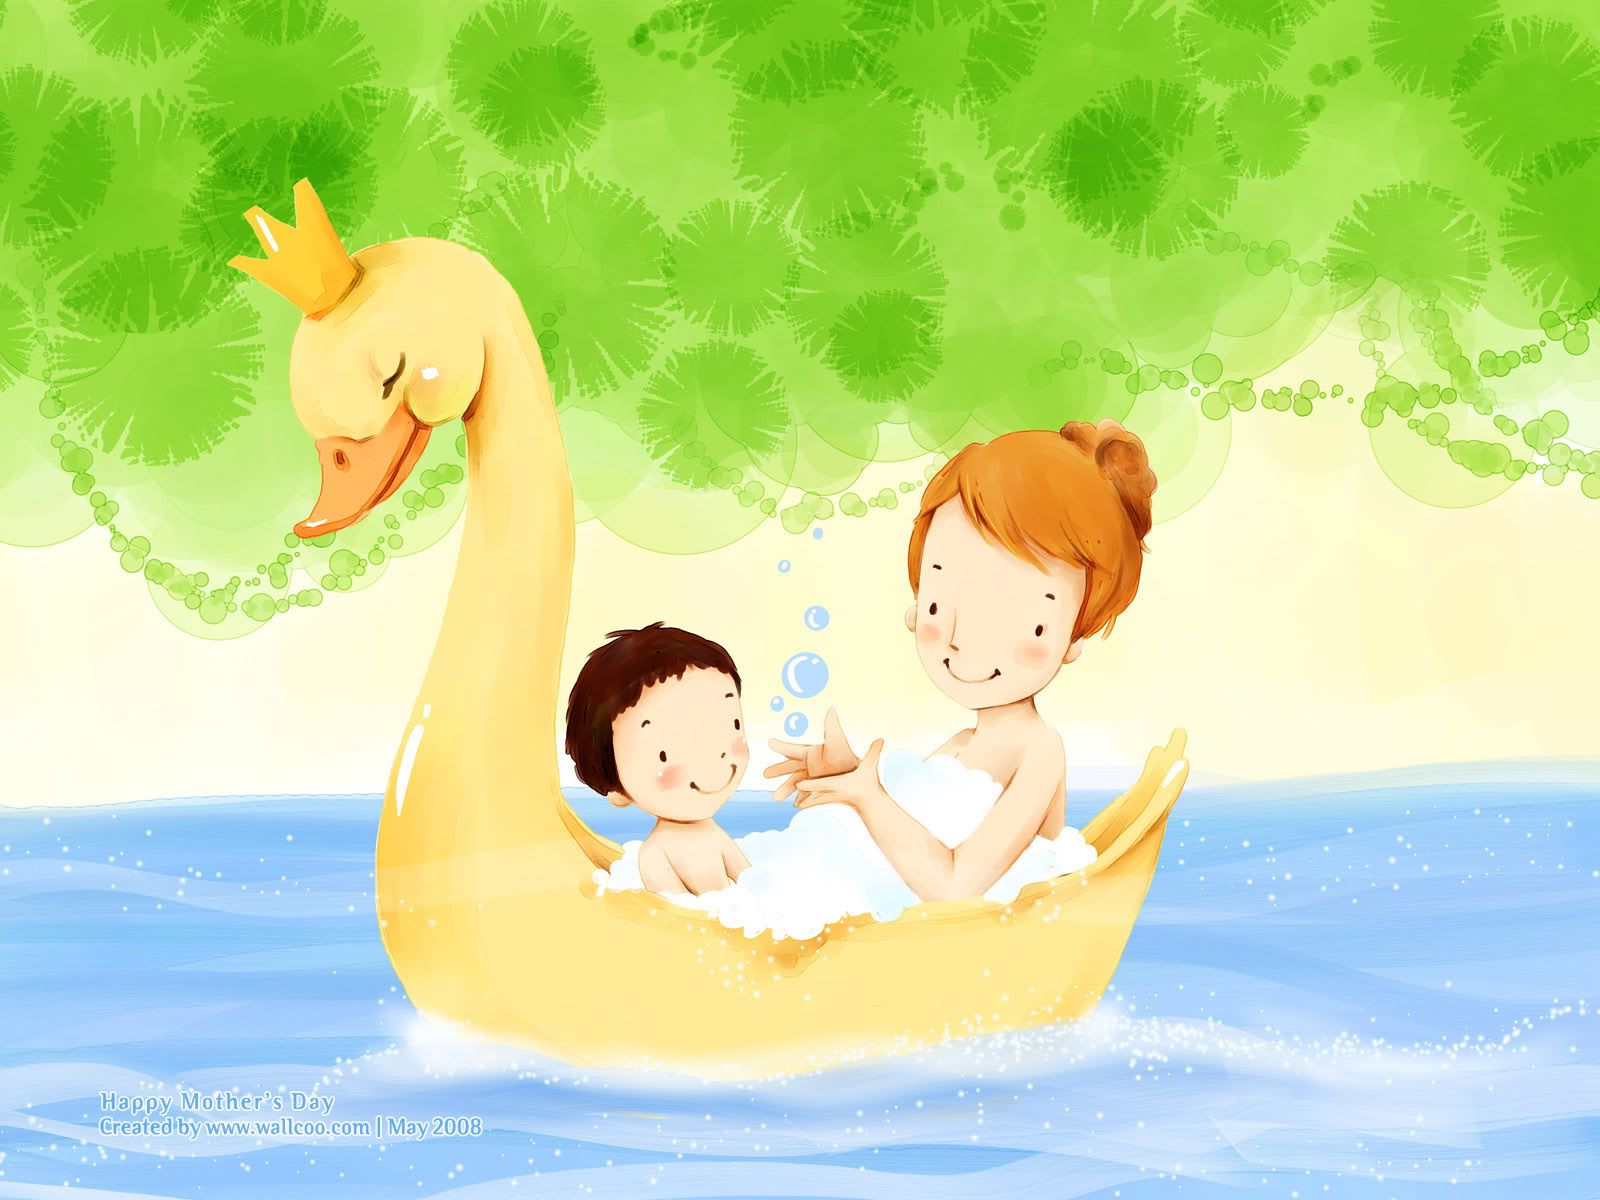 Cute Illustration With Image Cartoon Wallpaper Mothers Day